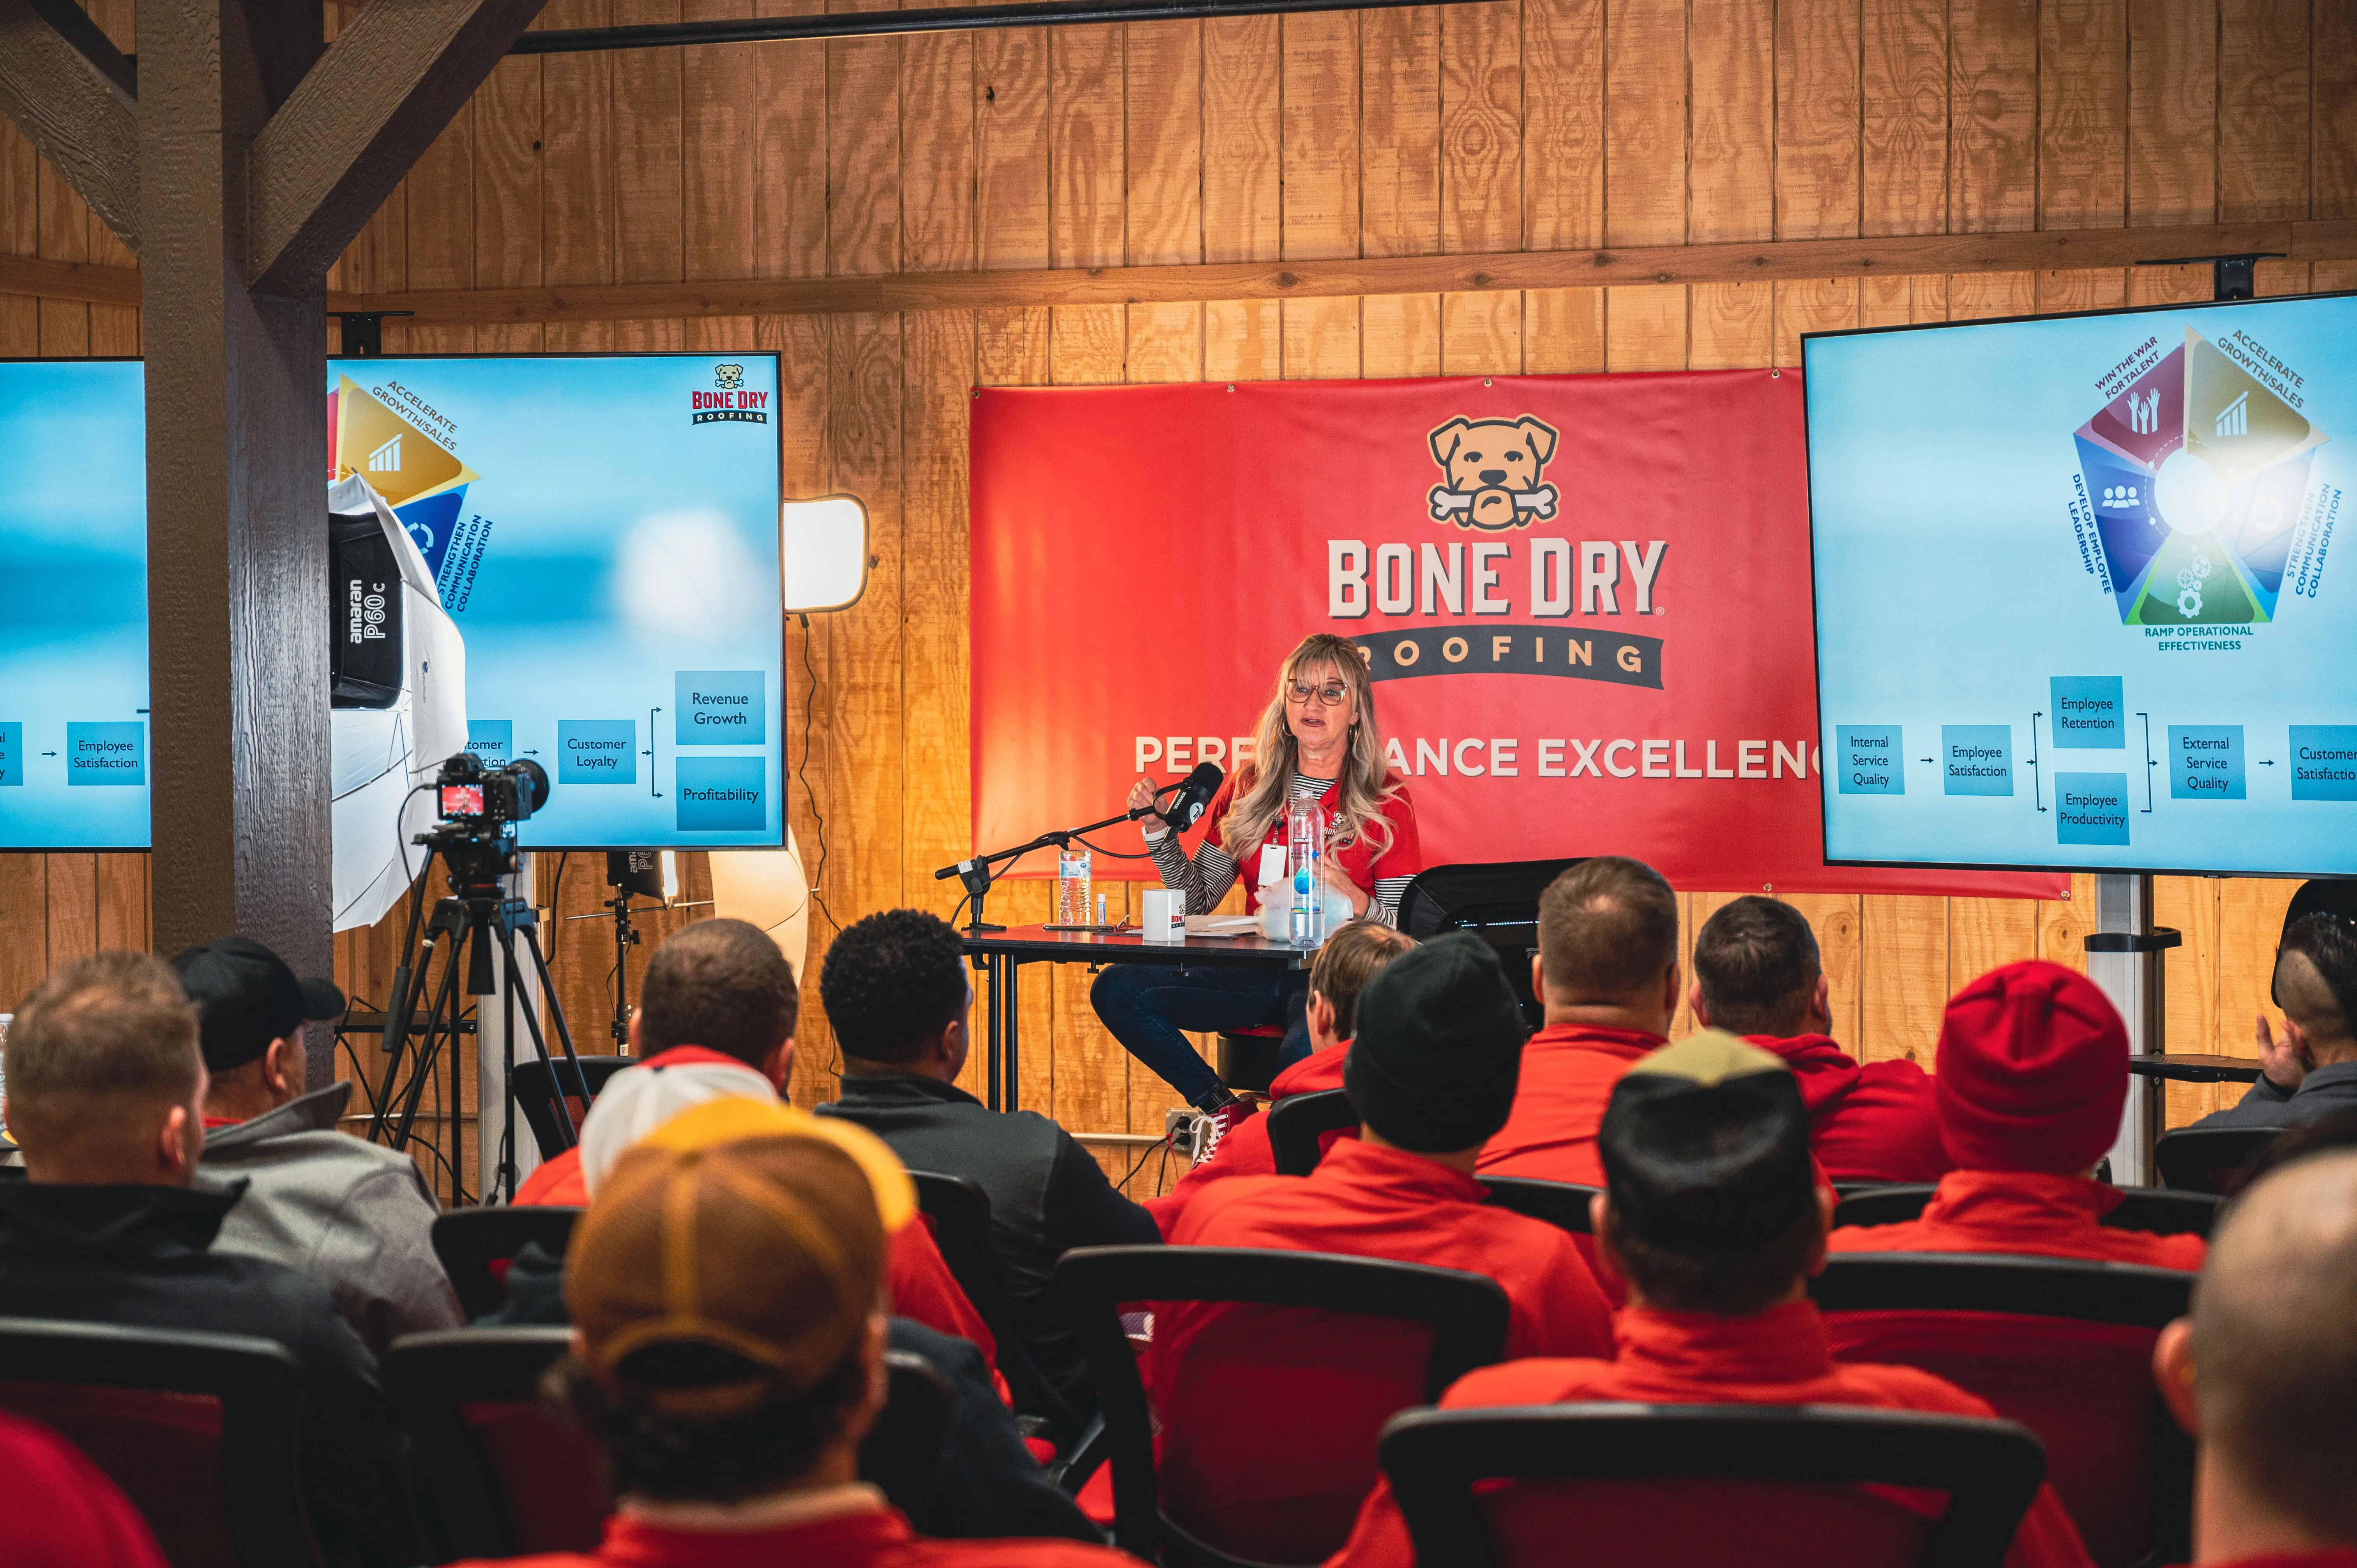 Woman presenting at a conference with attendees in red hats, video cameras recording, and banners reading "Bone Dry Roofing Company".